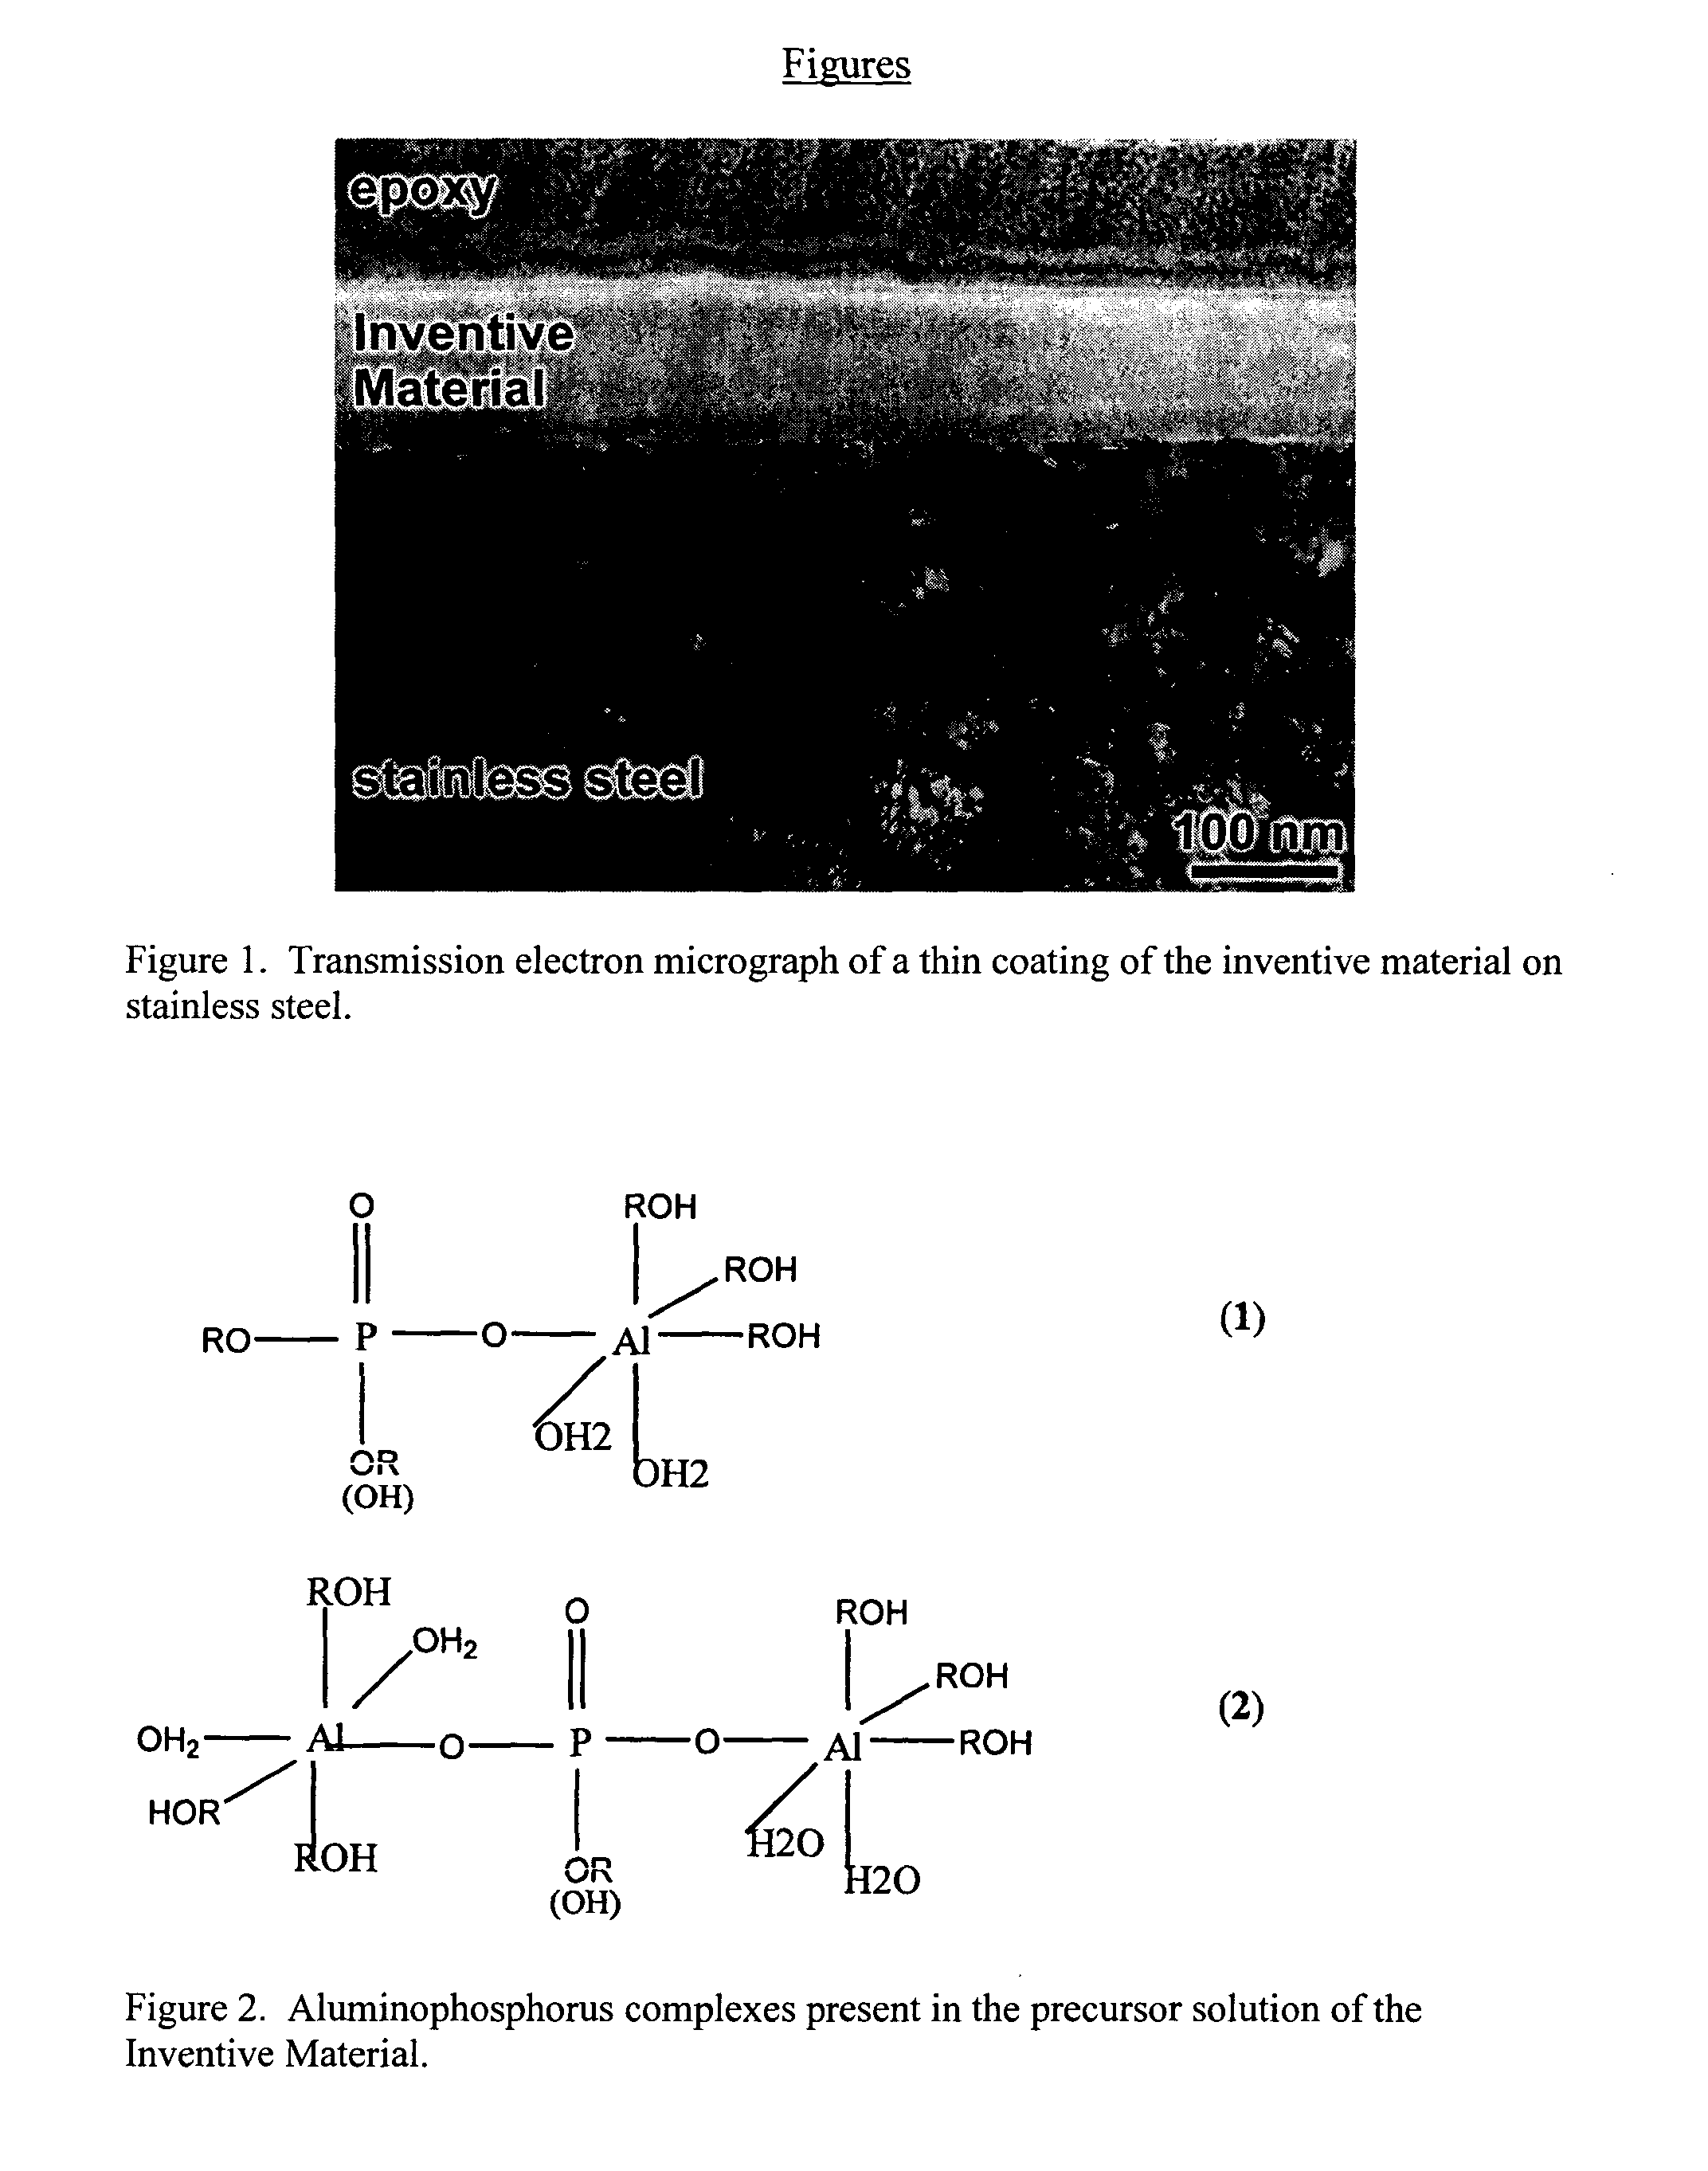 Aluminum phosphate compounds, compositions, materials and related composites